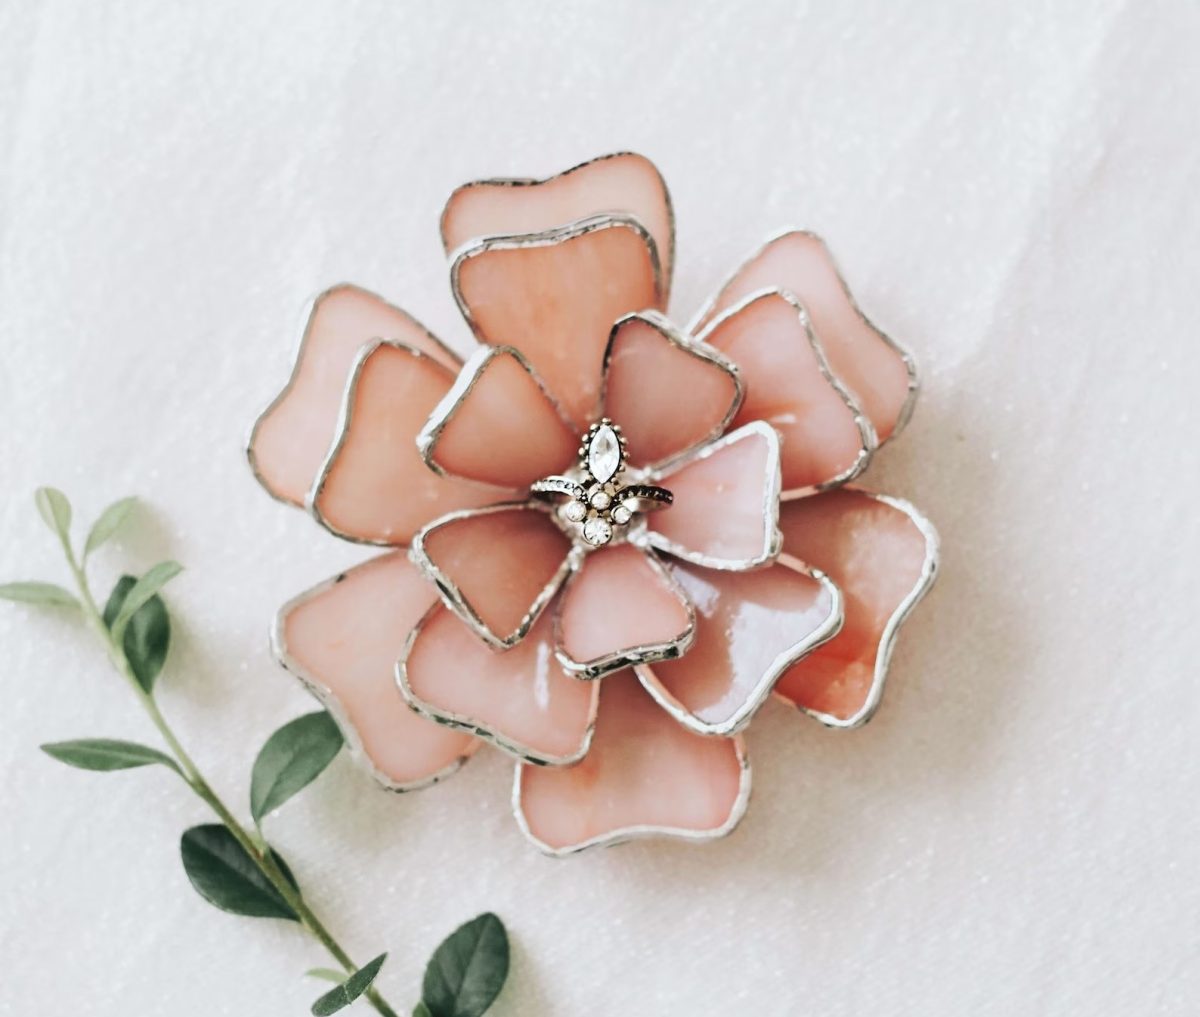 this Glass Flower Engagement Ring Holder is among our favorite unique bridal shower gifts